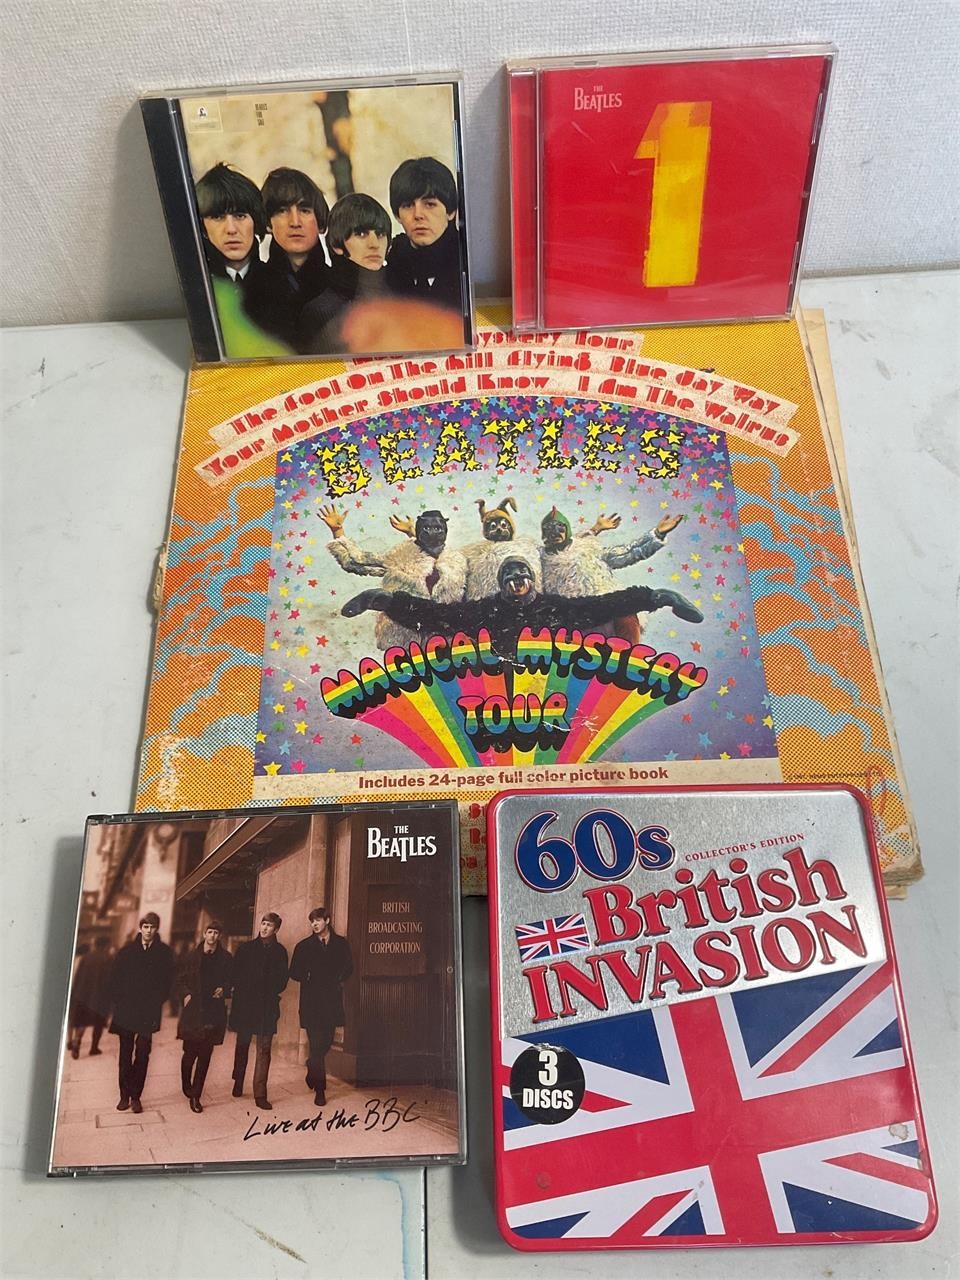 The Beatles cd and record lot